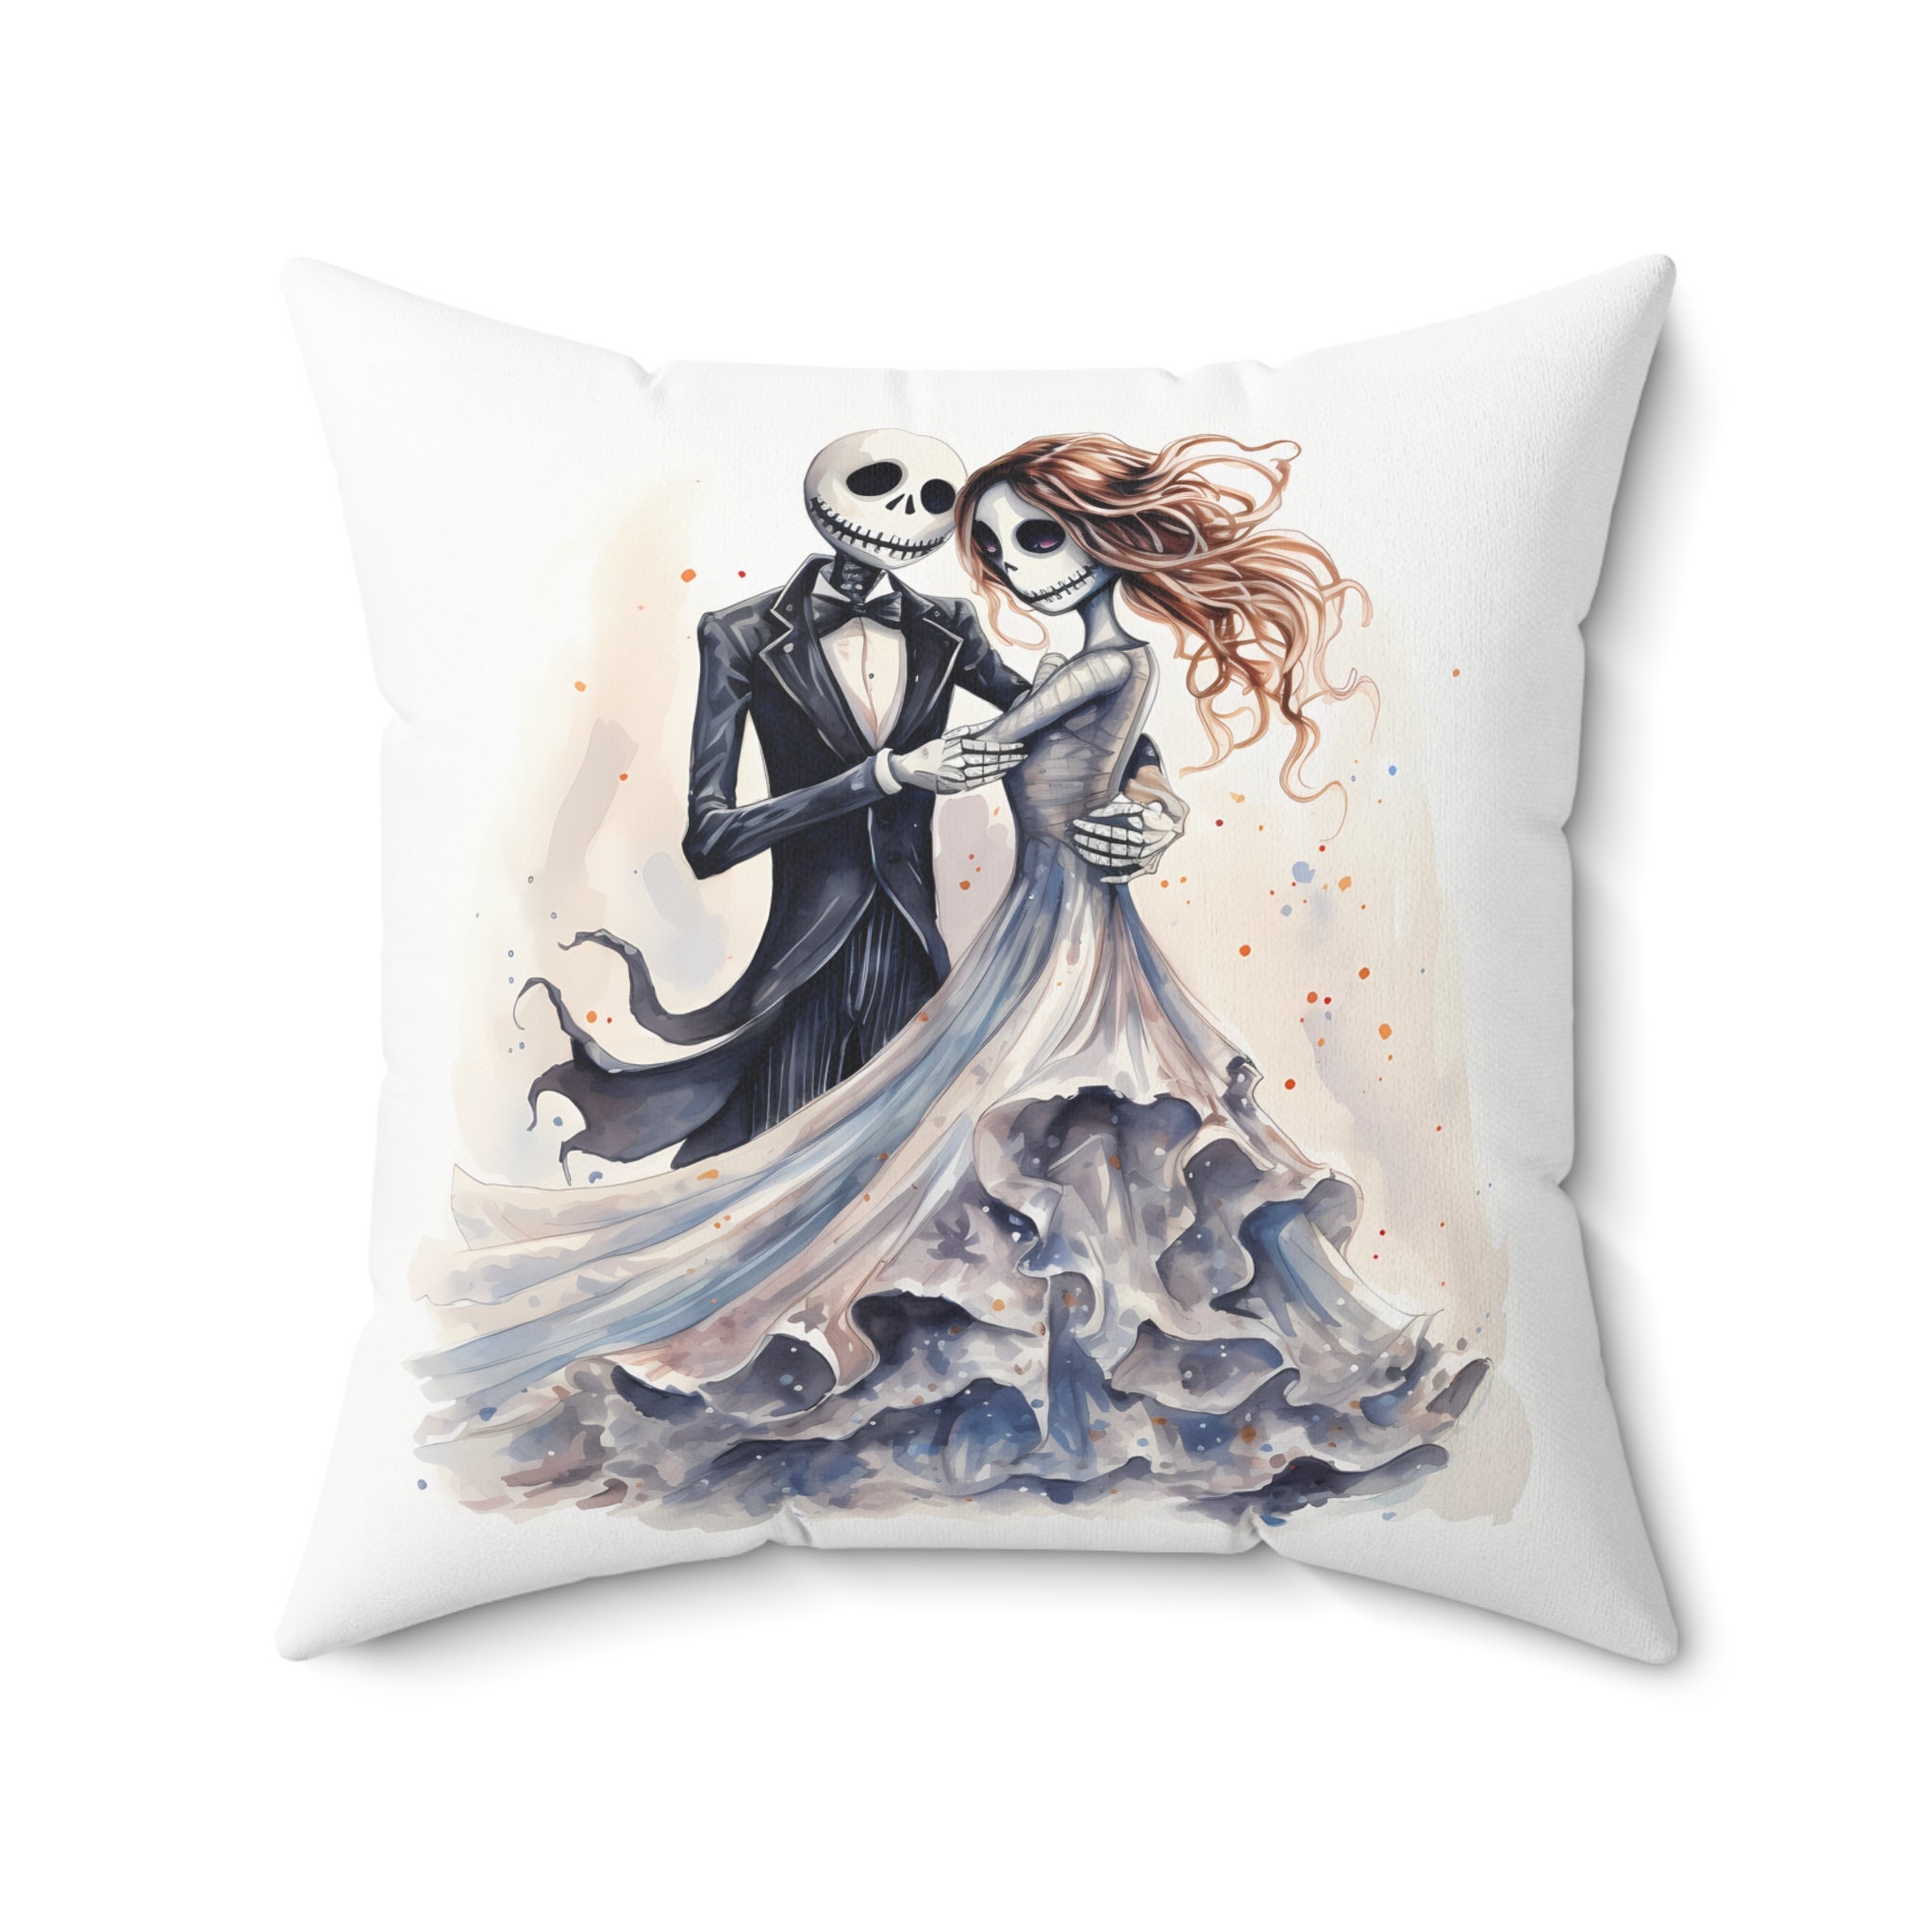 Sally Nightmare Before Christmas Pillow cover 16 x 16” – Highway